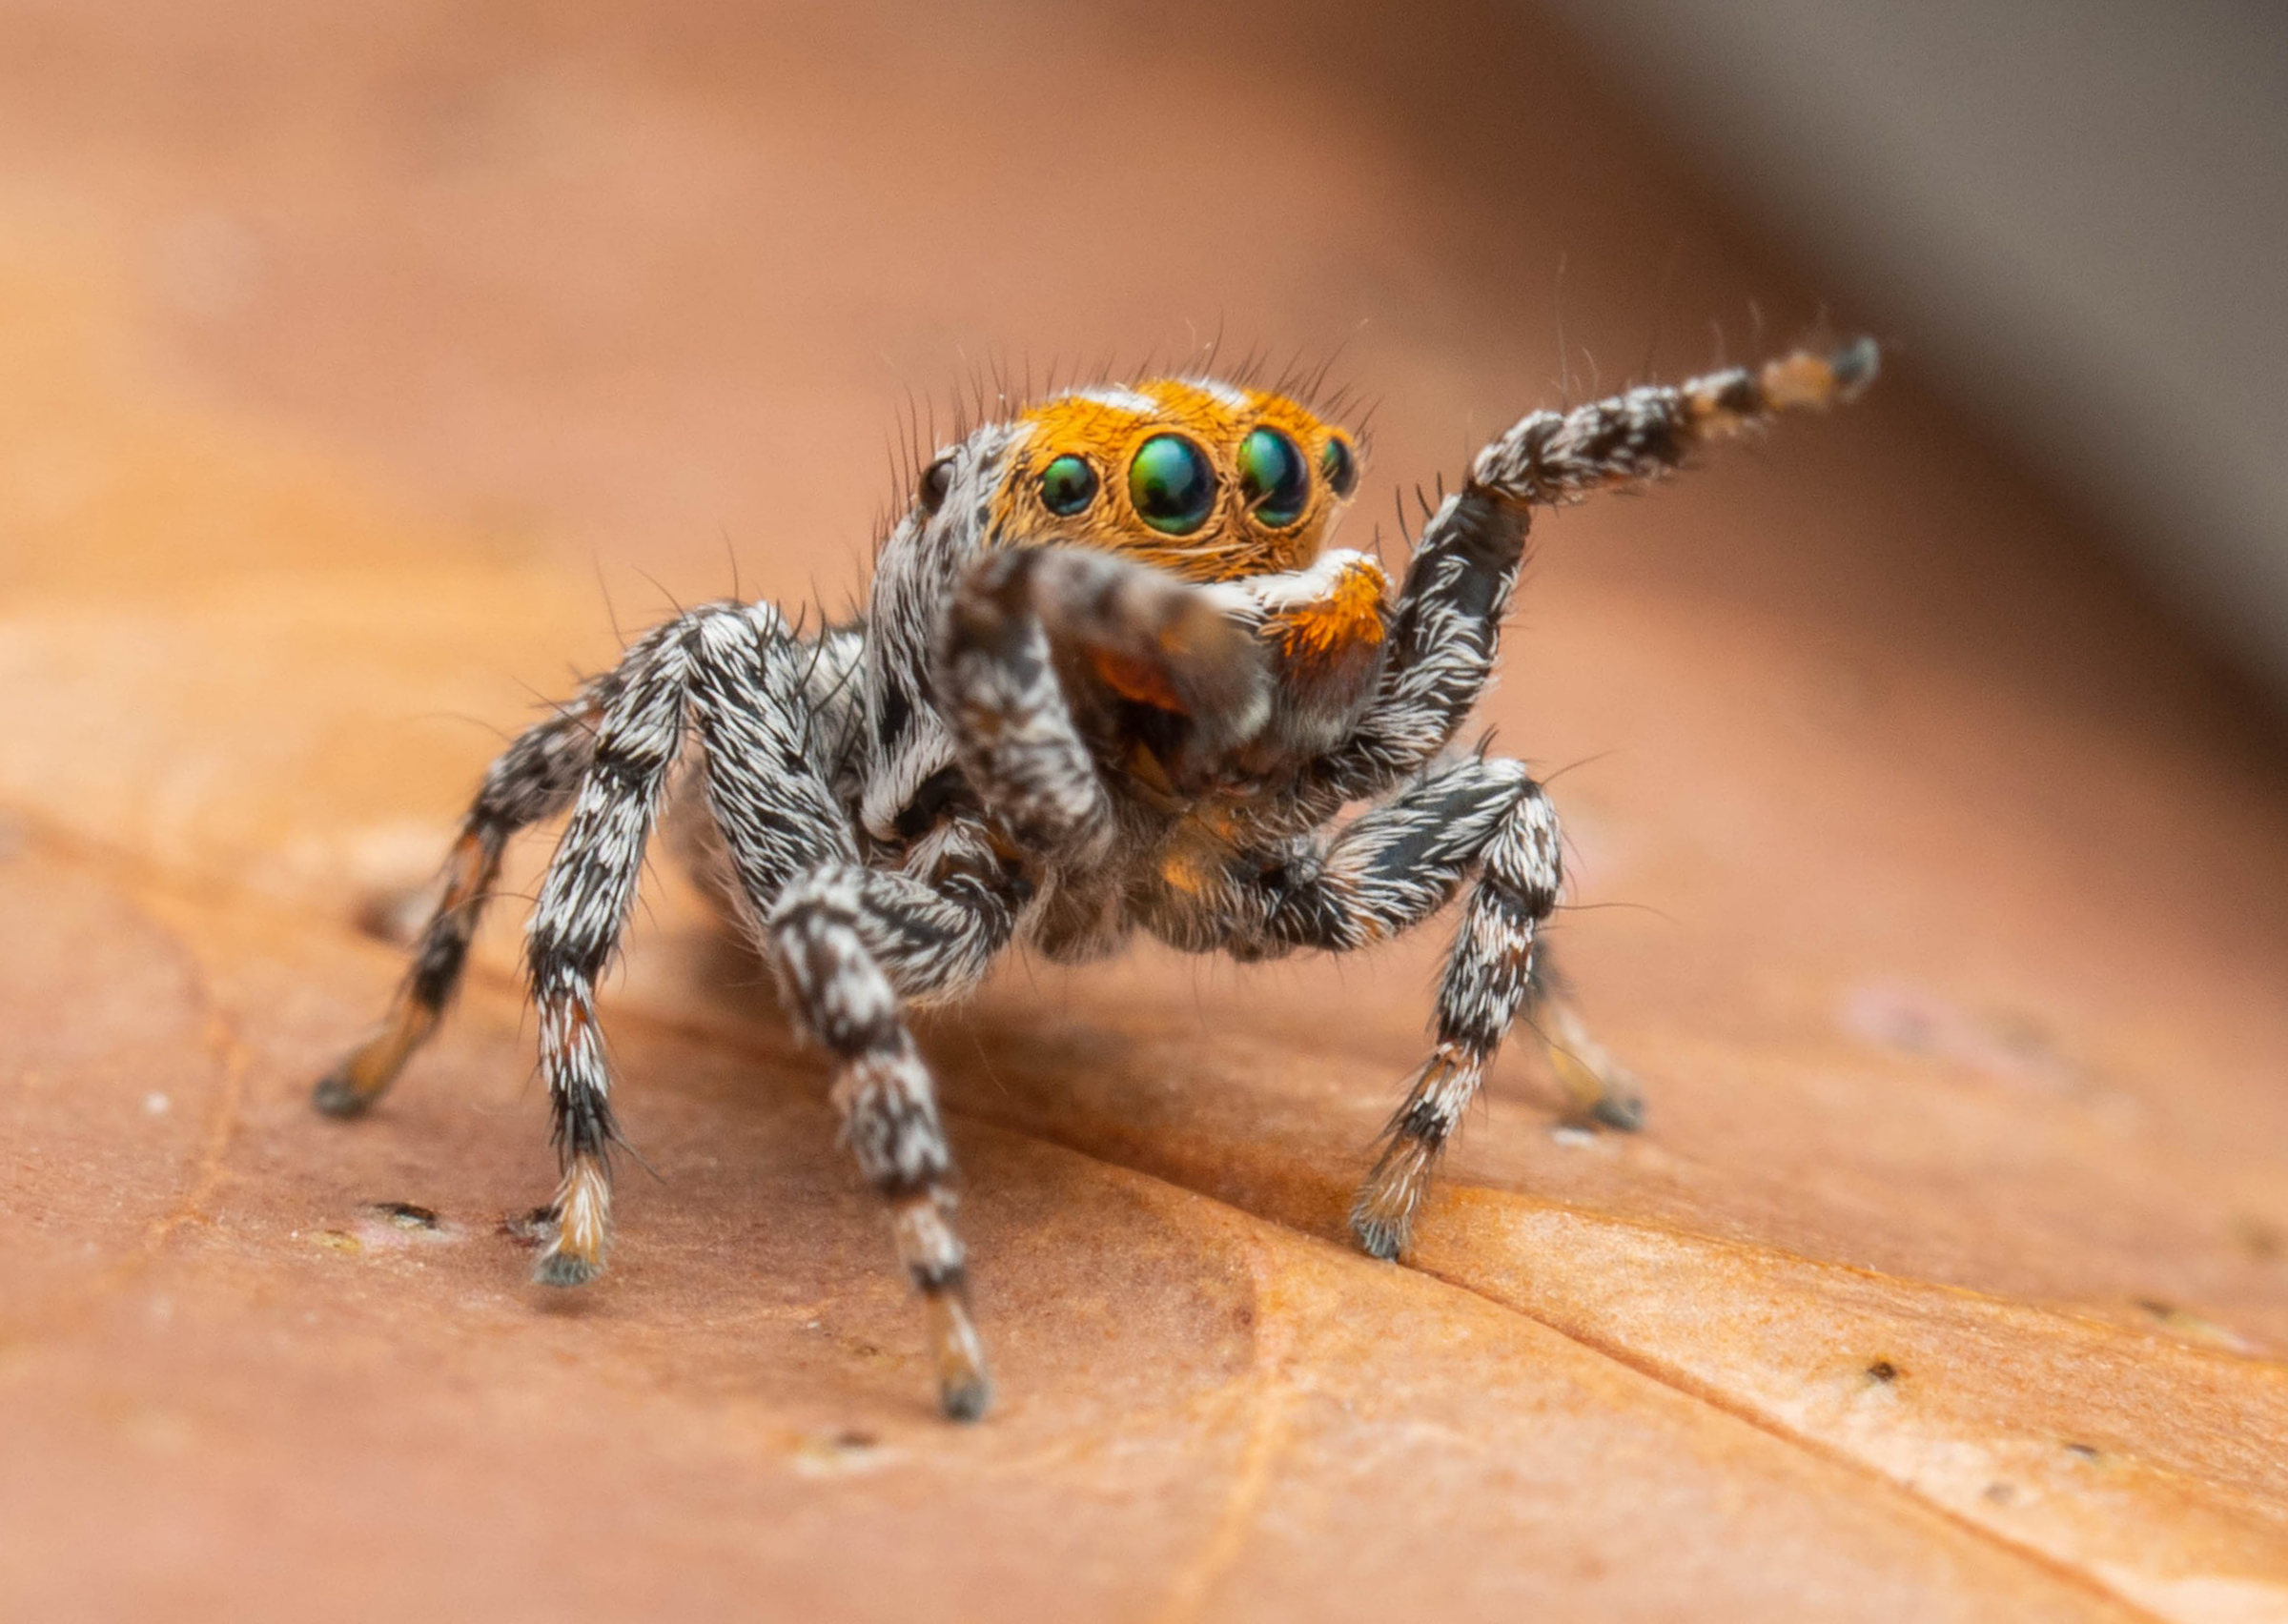 Nemo found: new species of dancing peacock spider named